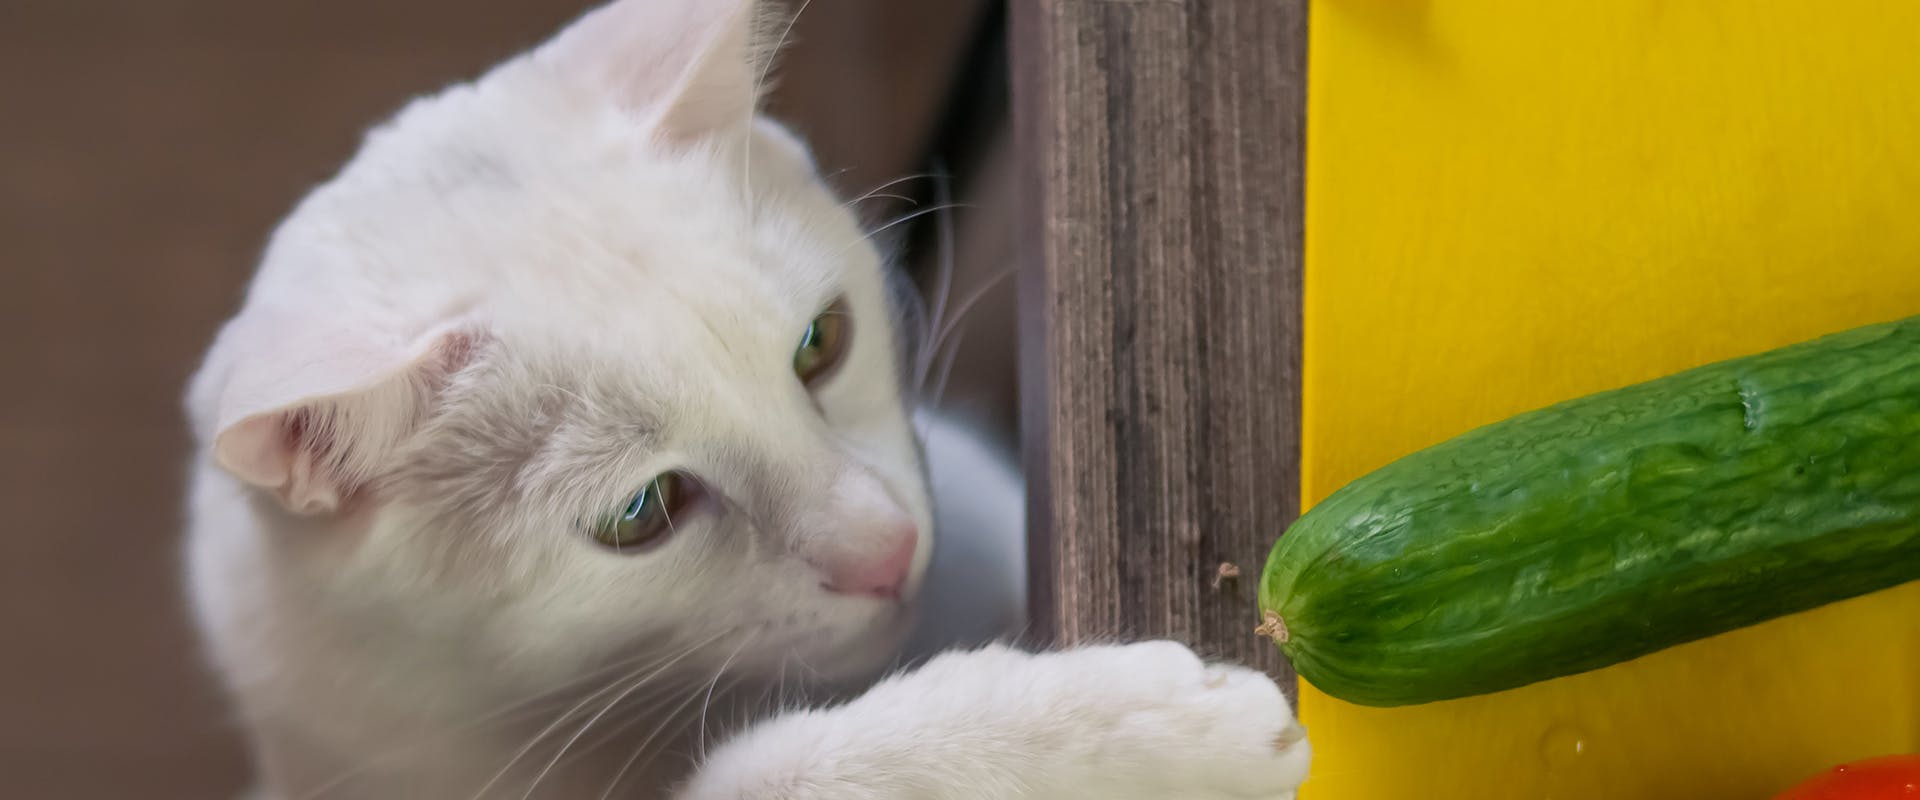 A cat pawing at a cucumber suspiciously